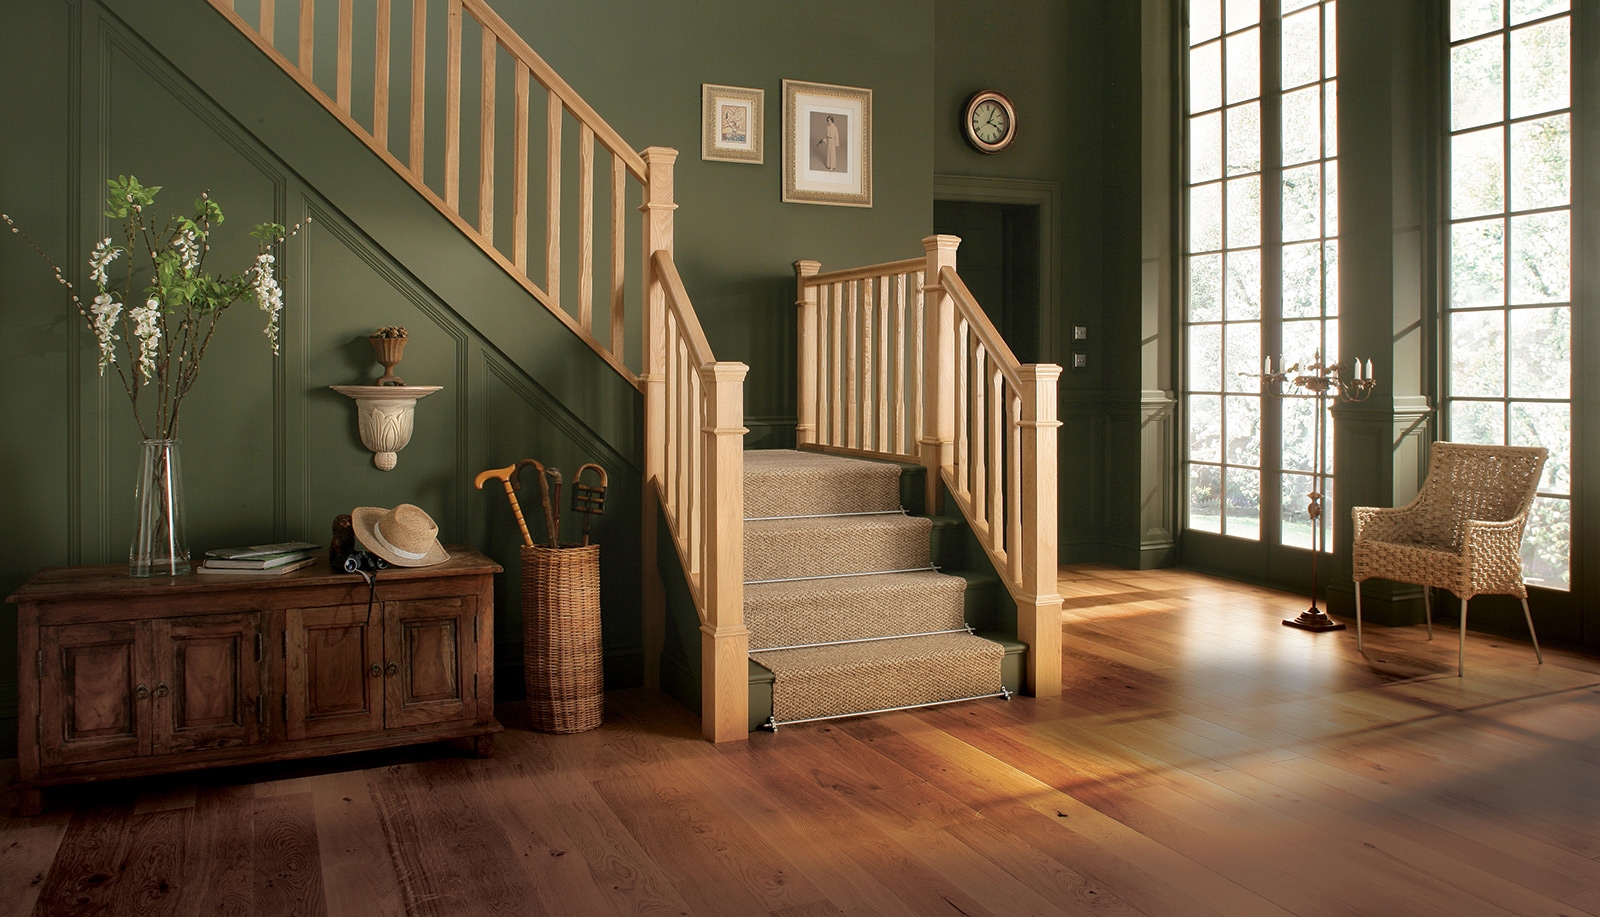 Choosing the right handrail for your staircase